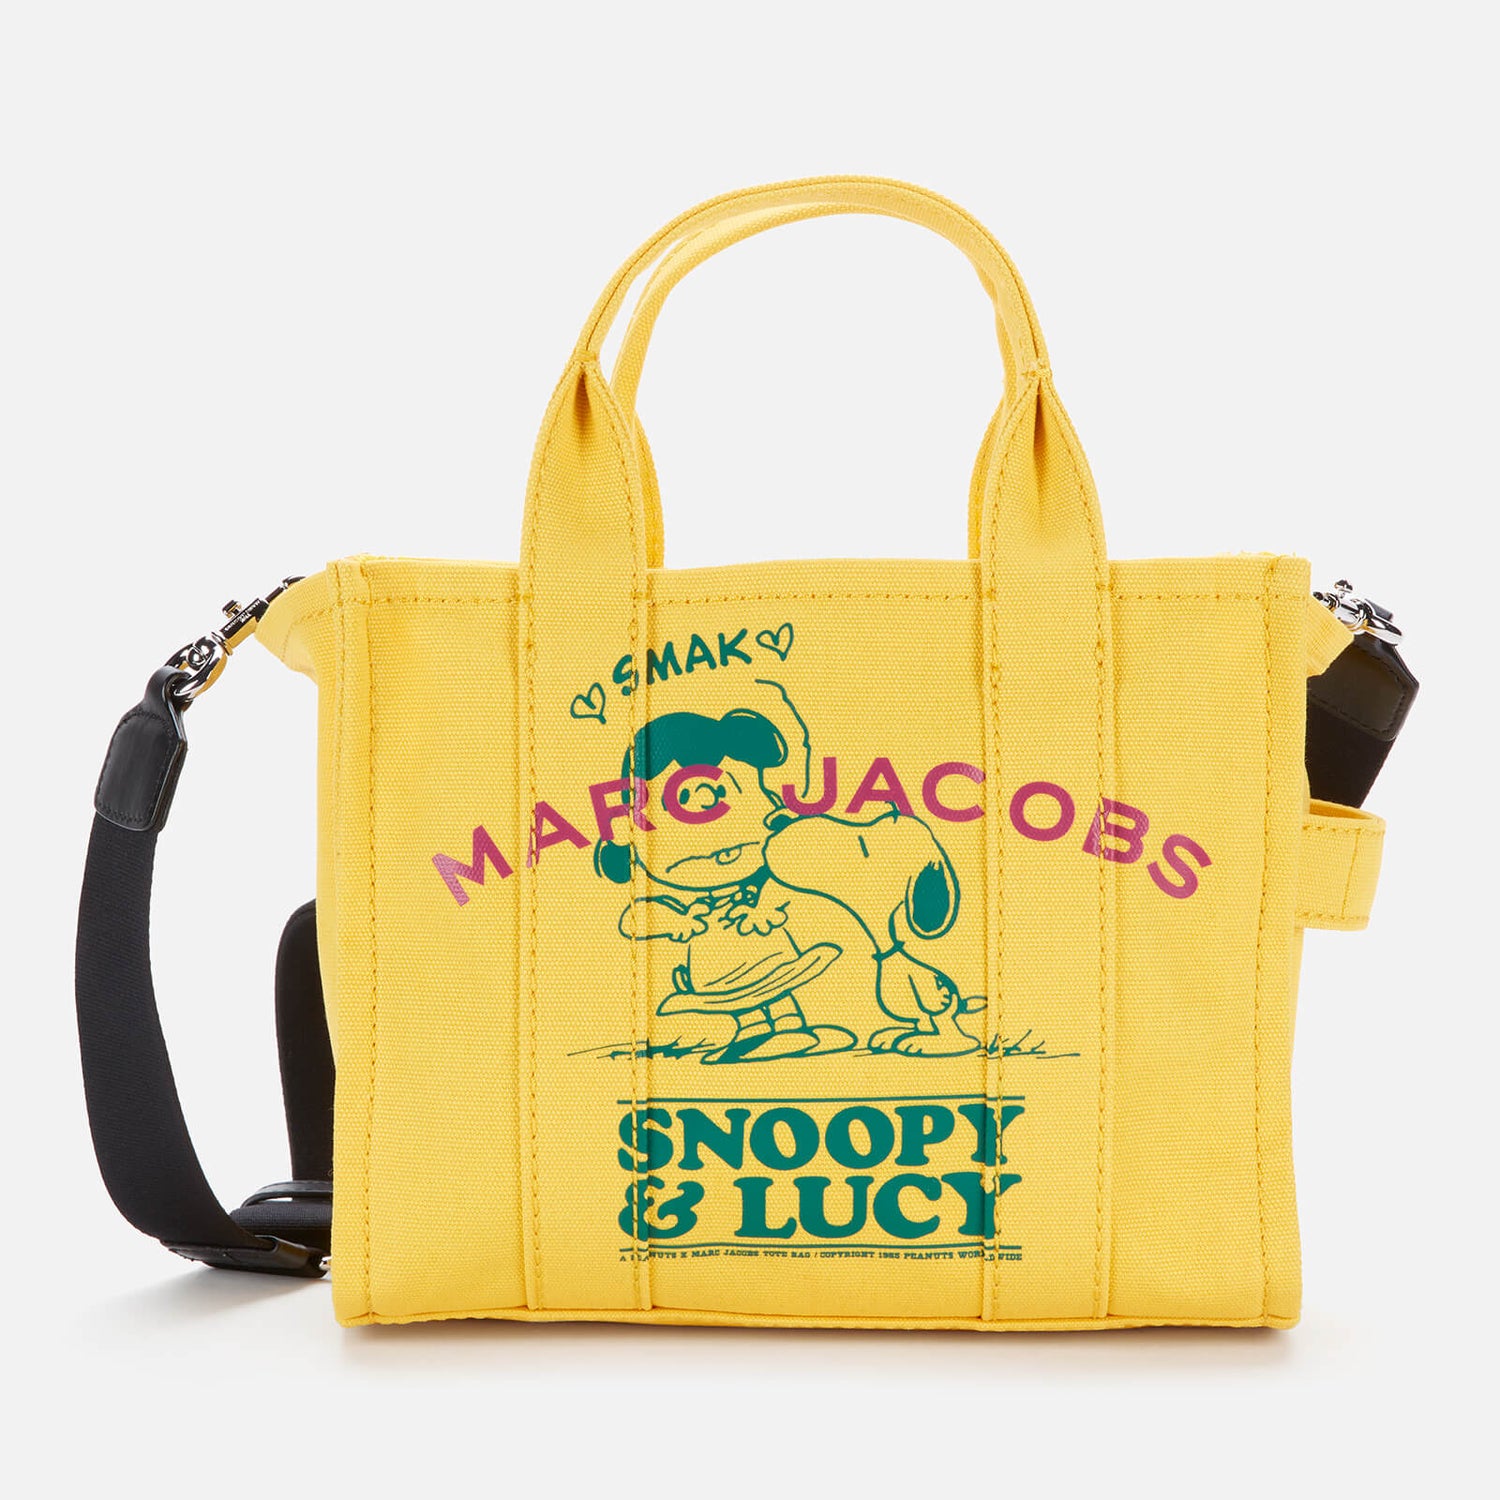 Marc Jacobs Women's The Tote Bag Peanuts Snoopy - Yellow